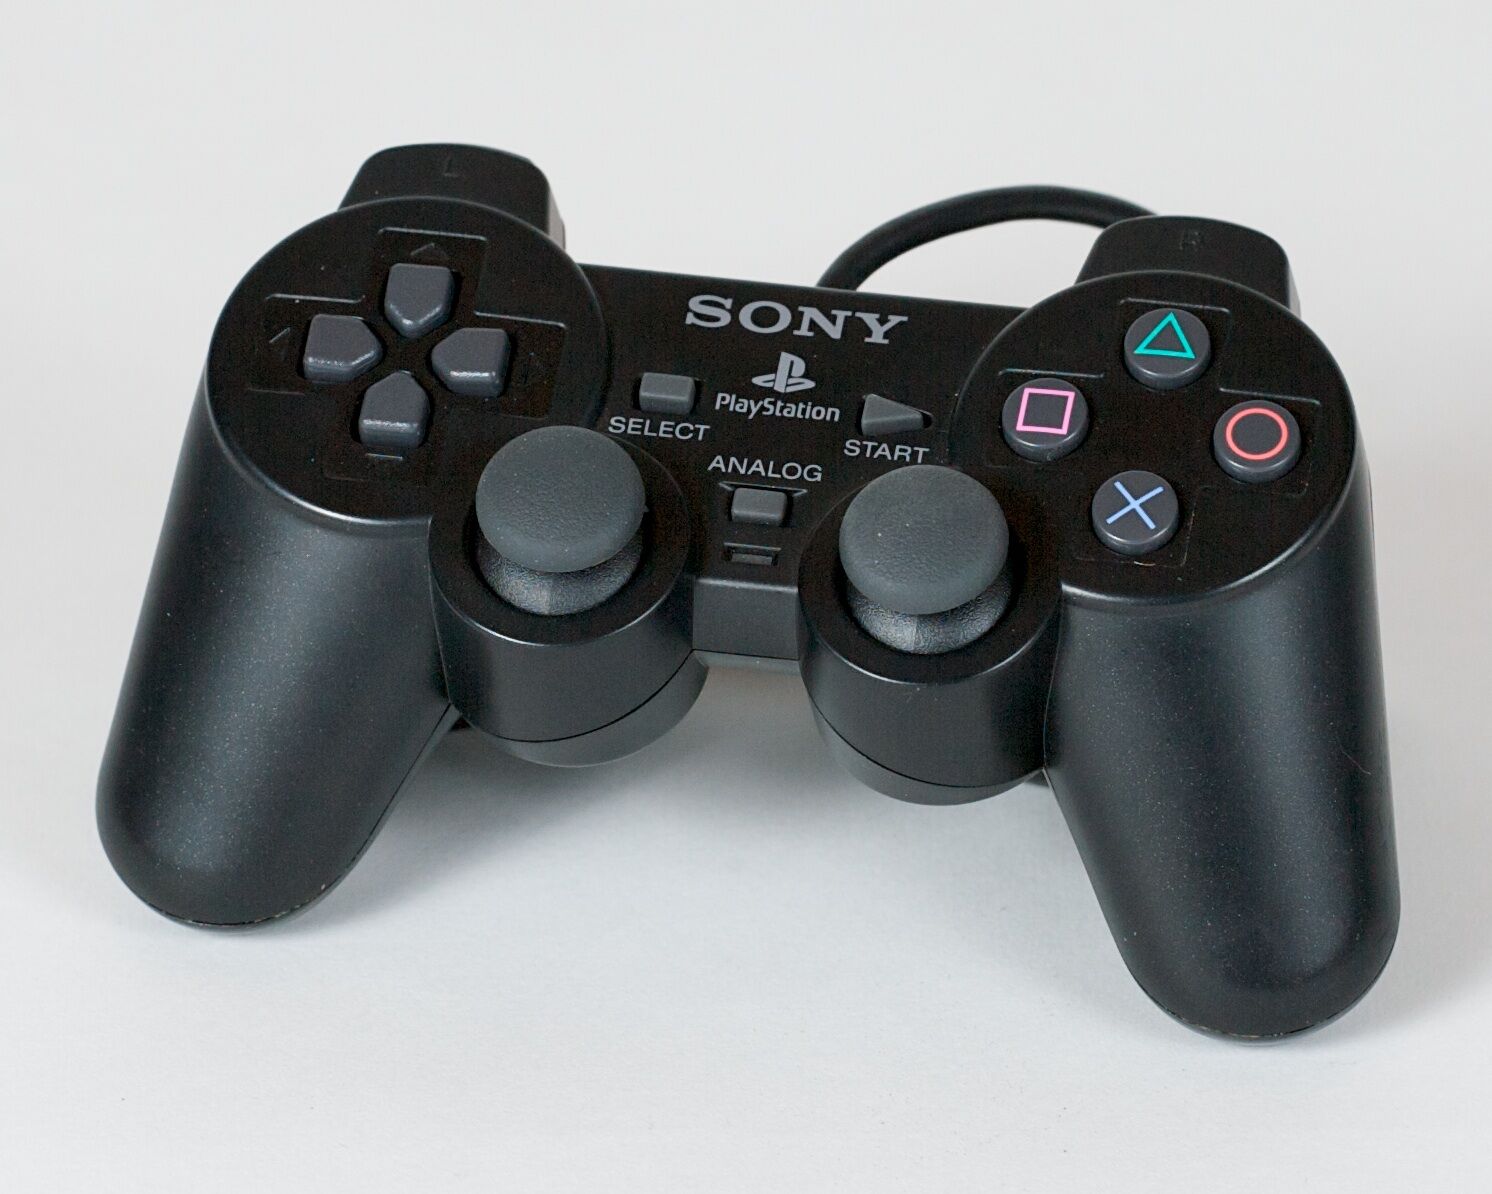 Ps2 playstation. Sony PLAYSTATION 2 ps2. Сони дуалшок 2. Джойстик сони плейстейшен 2. Sony PLAYSTATION джойстики для ps1,ps2.